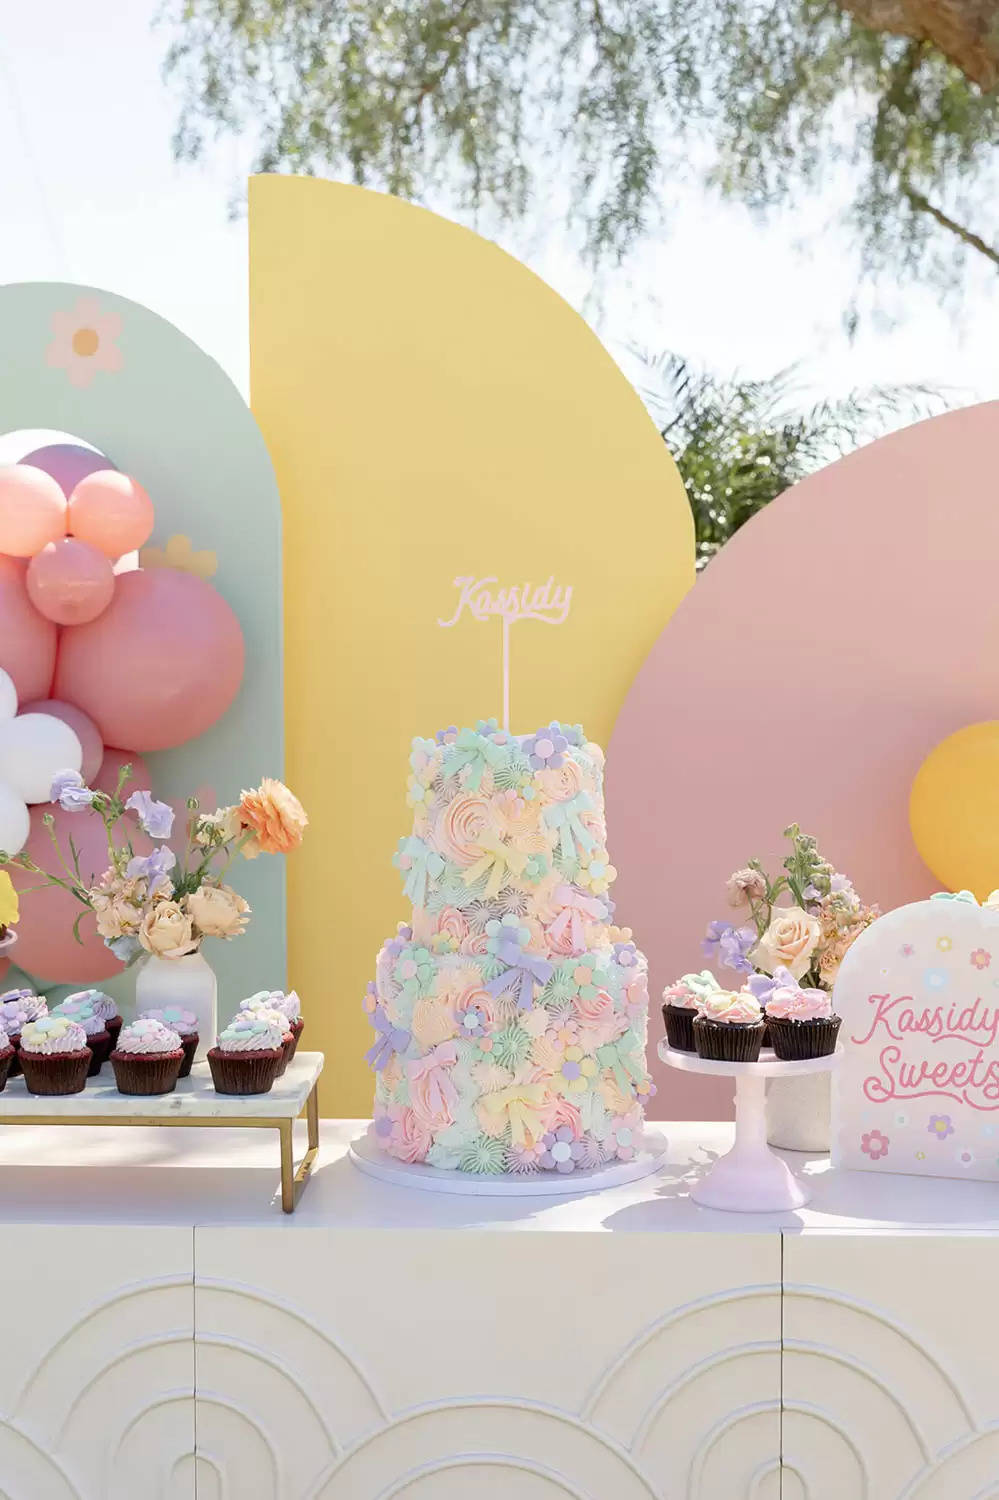 Woman Birthday Celebration Concepts for Spring